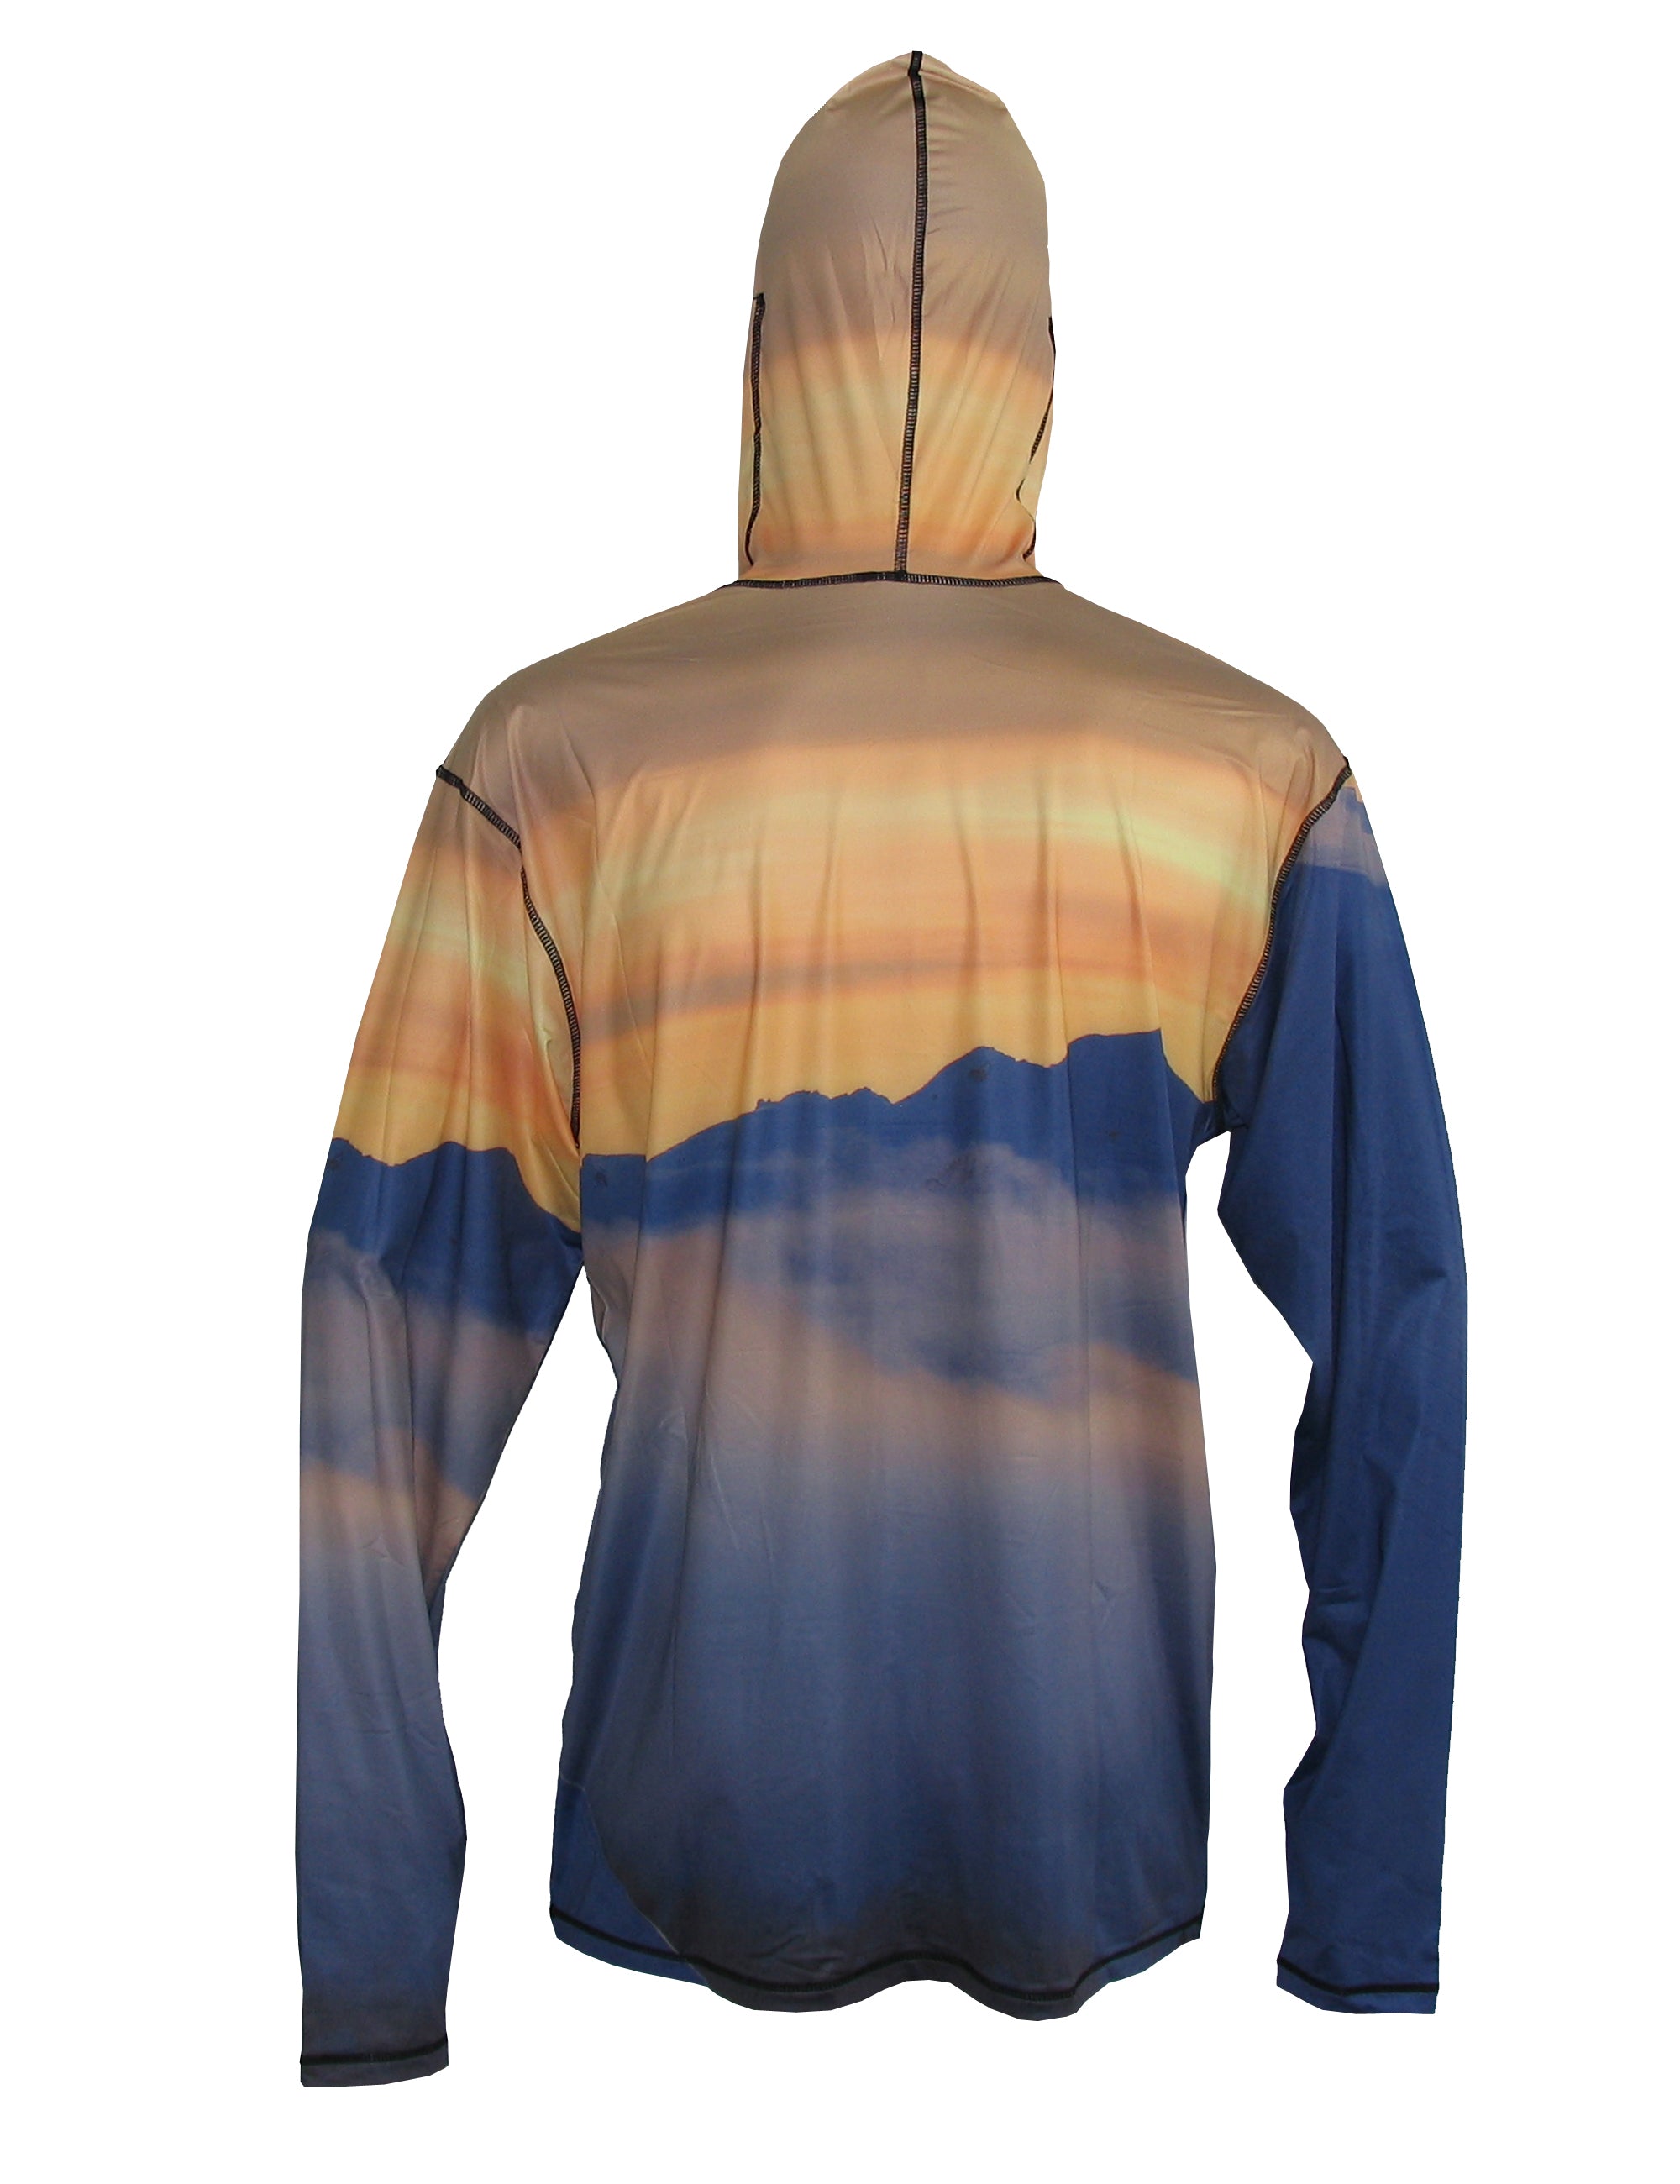 Fincognito Flexshell Hoodie 1/4-Zip Tranquility Fish Print Fly Fishing